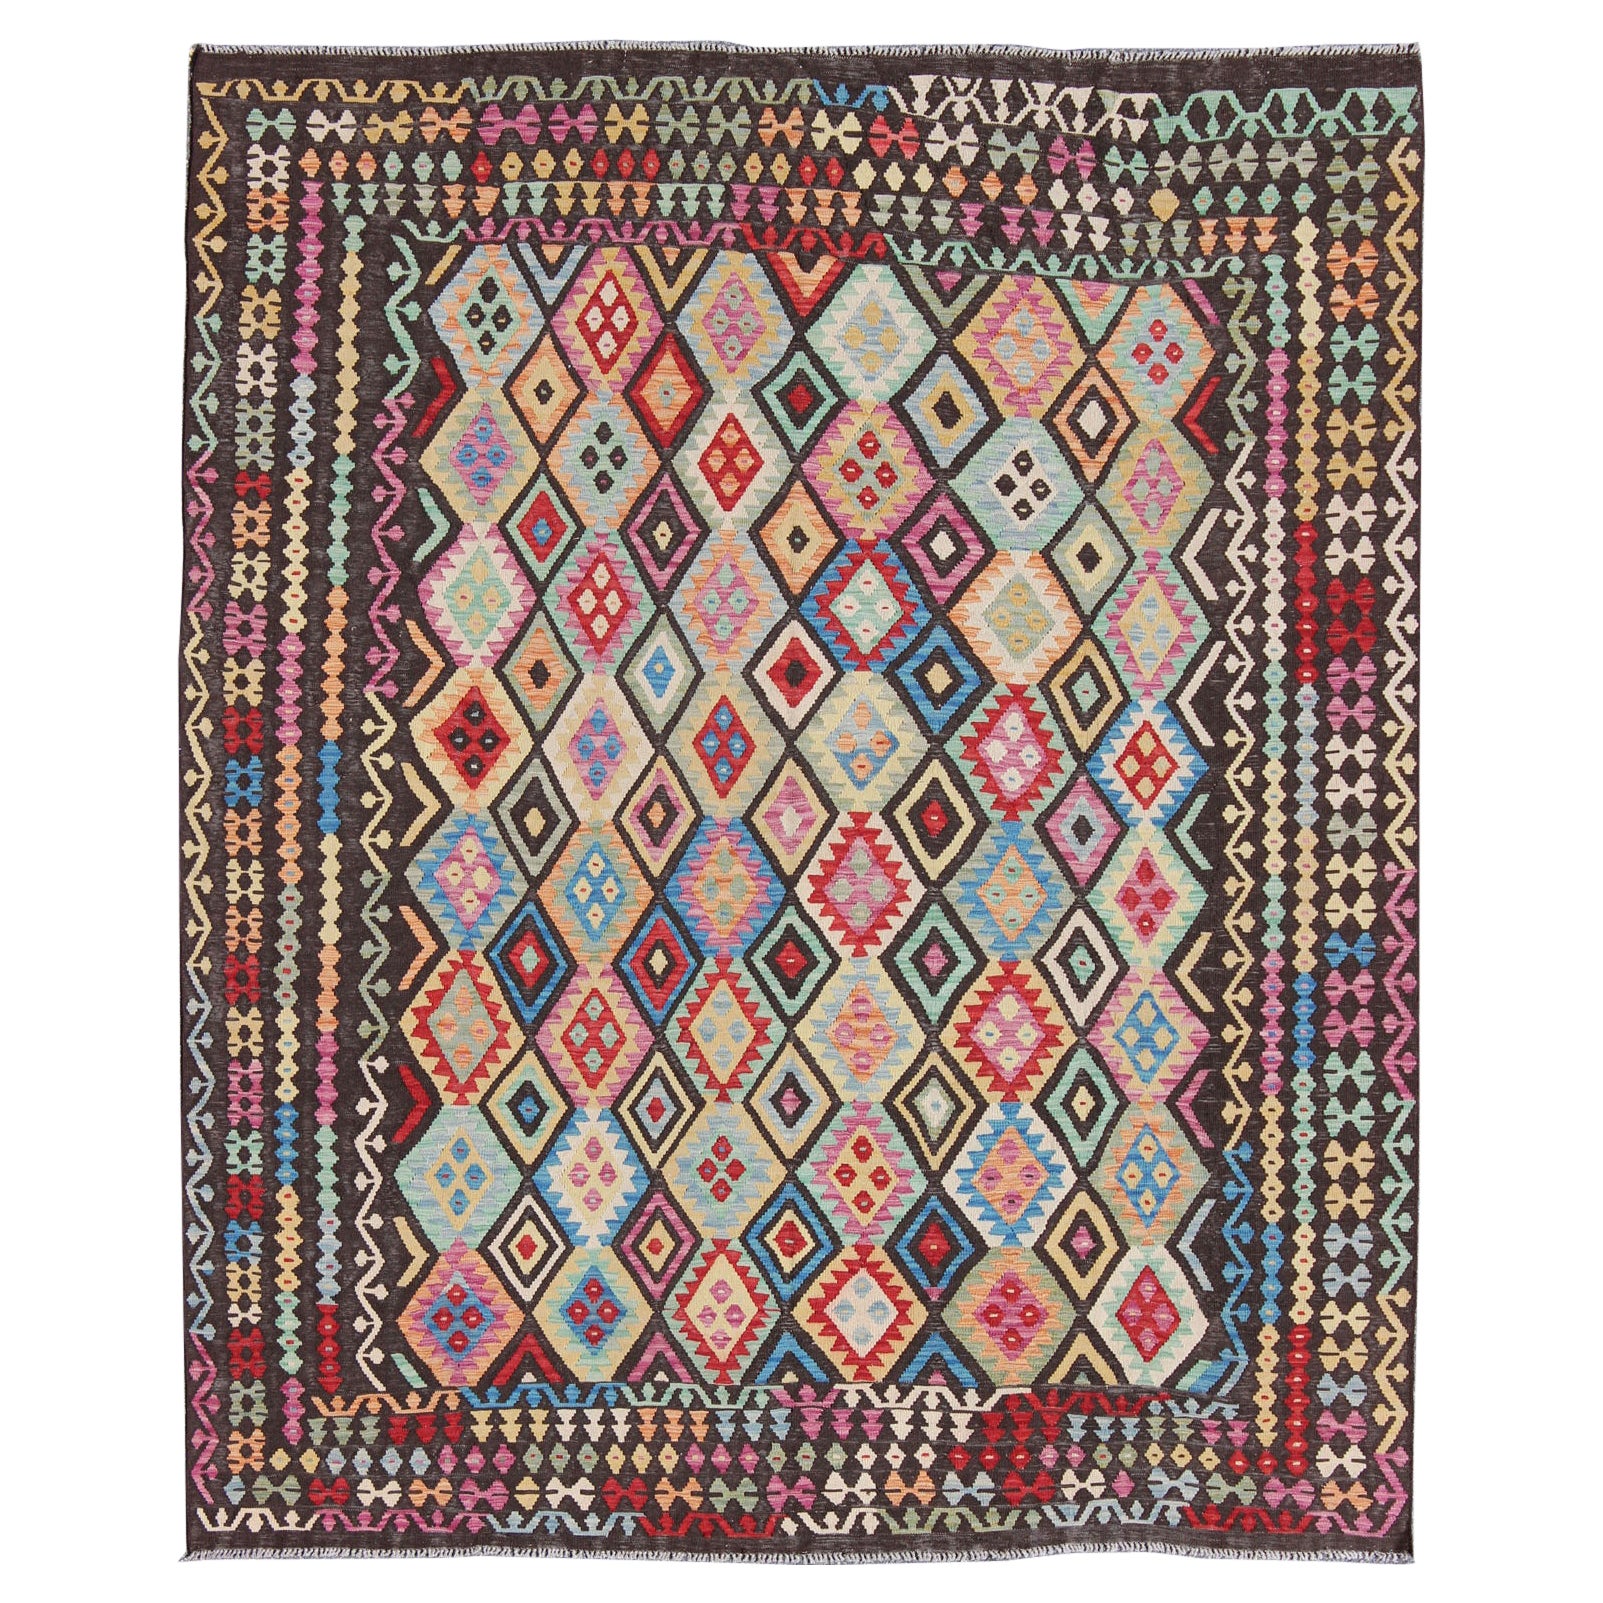 Colorful Tribal Kilim Flat Weave Rug with Chocolate Brown & Bright Multi Colors For Sale